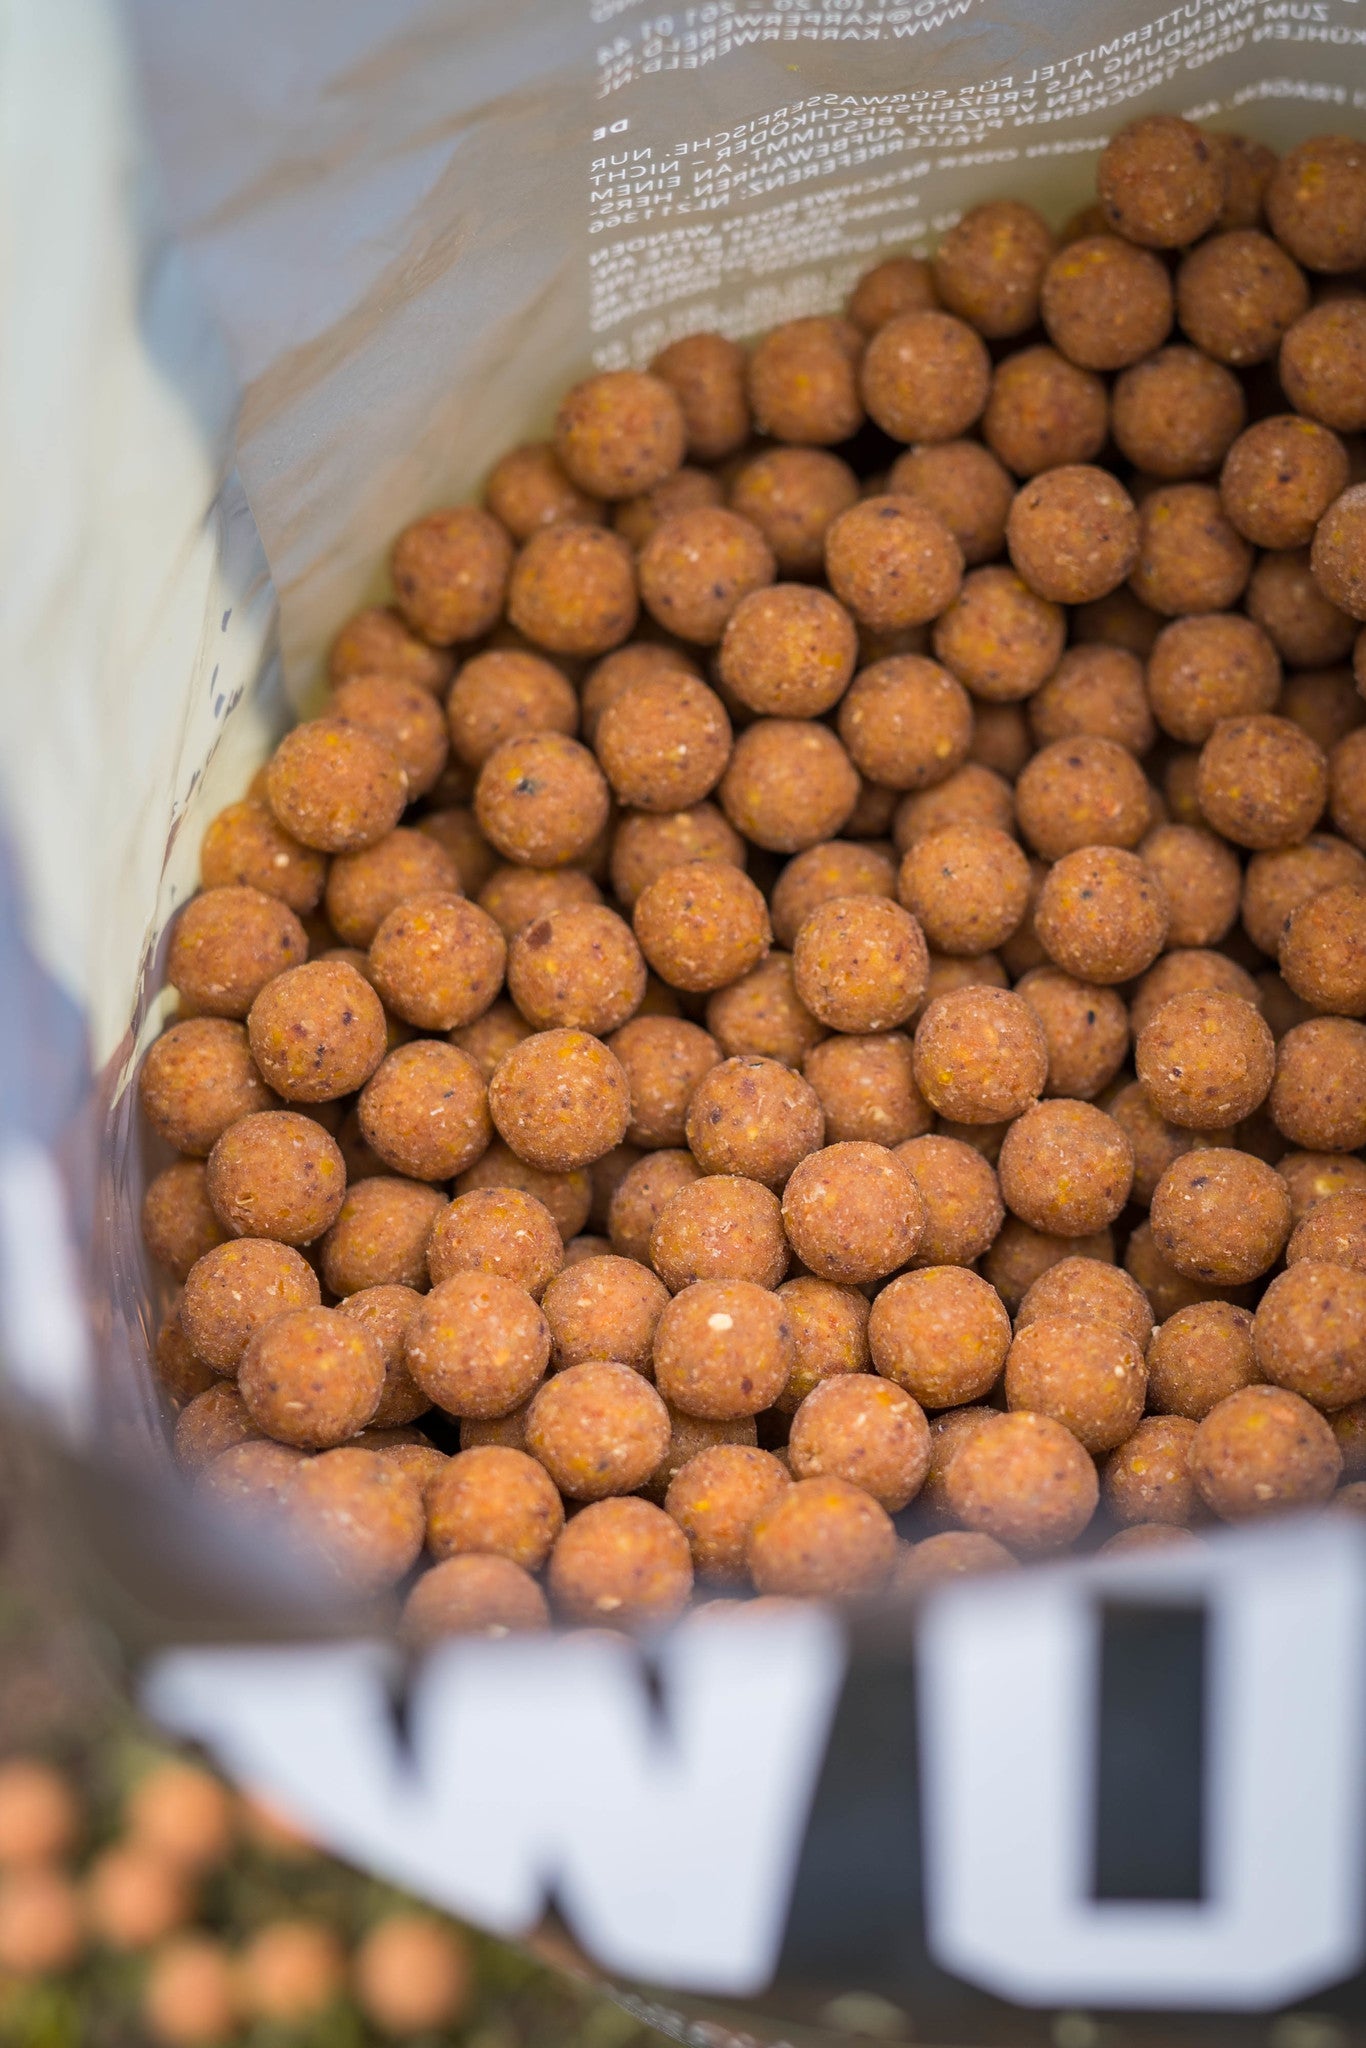 
                  
                    KWO Krill Specials 5KG - Boilies - KWO Shop
                  
                